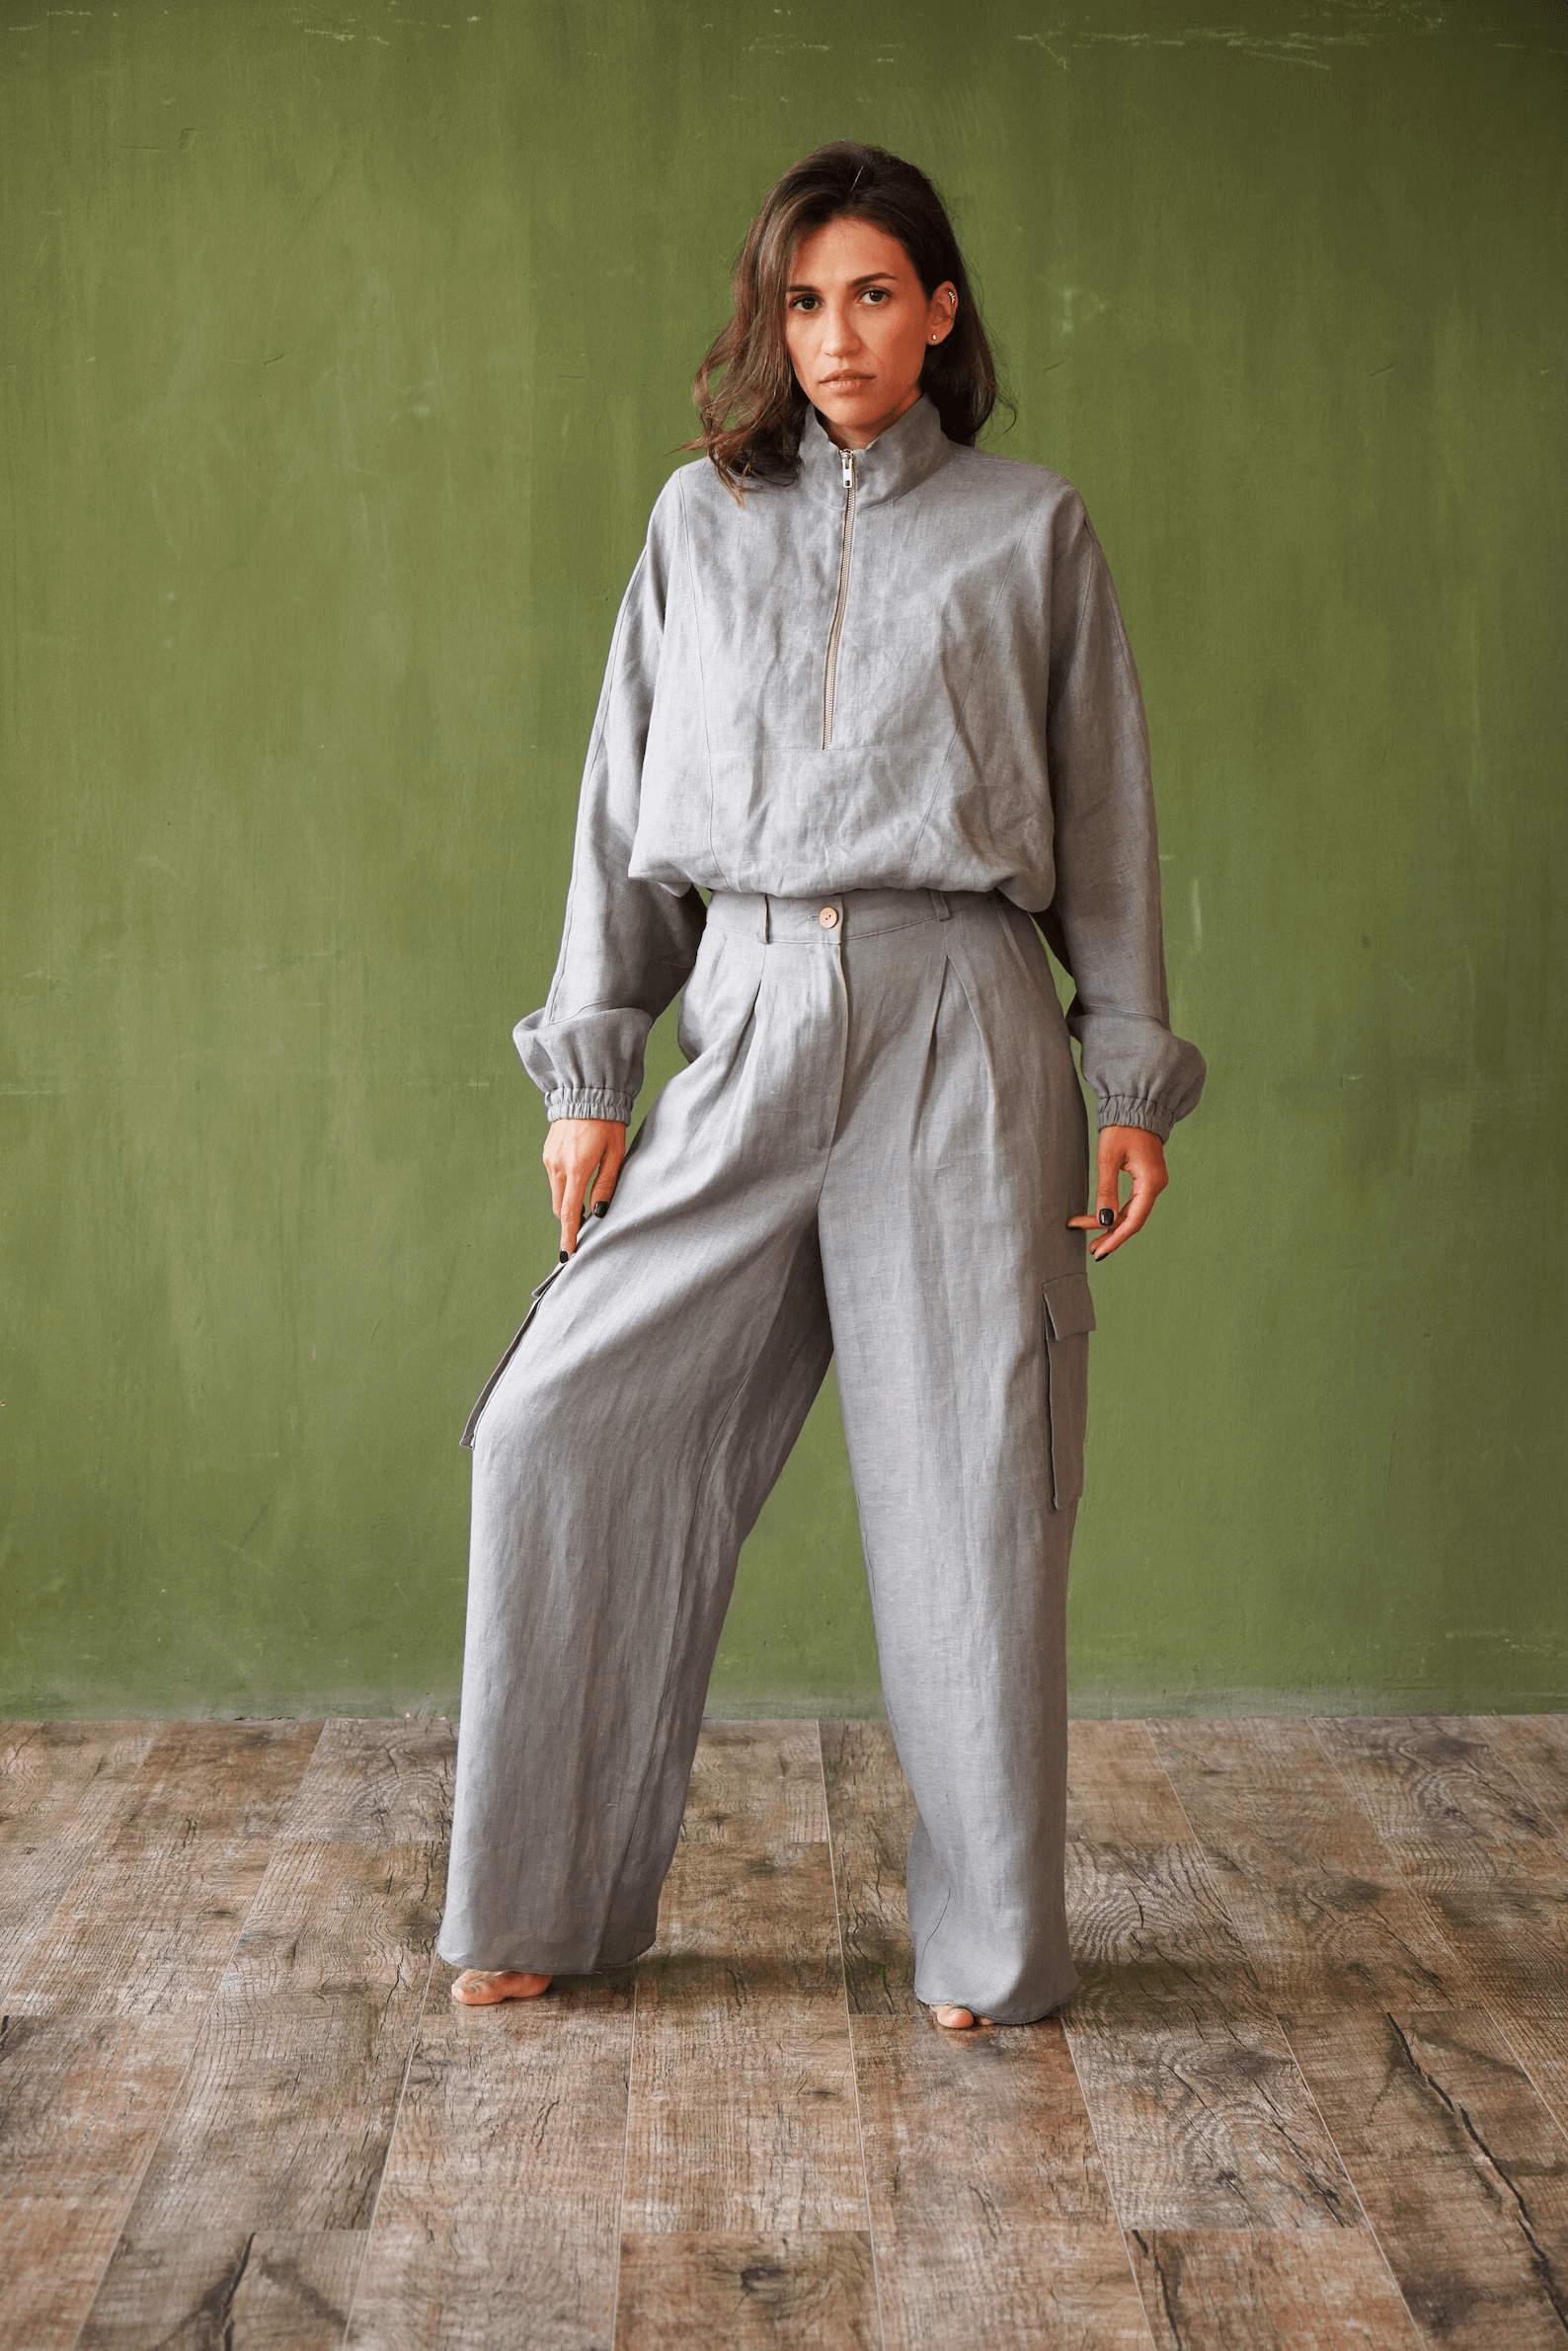  Tall Linen Pants for Women Black Linen Pants Women Women Spring  Pants Womens Hippie Pants Bimini Boot Small Stuff for Five Dollars and  Under one Dollar Items only : Clothing, Shoes